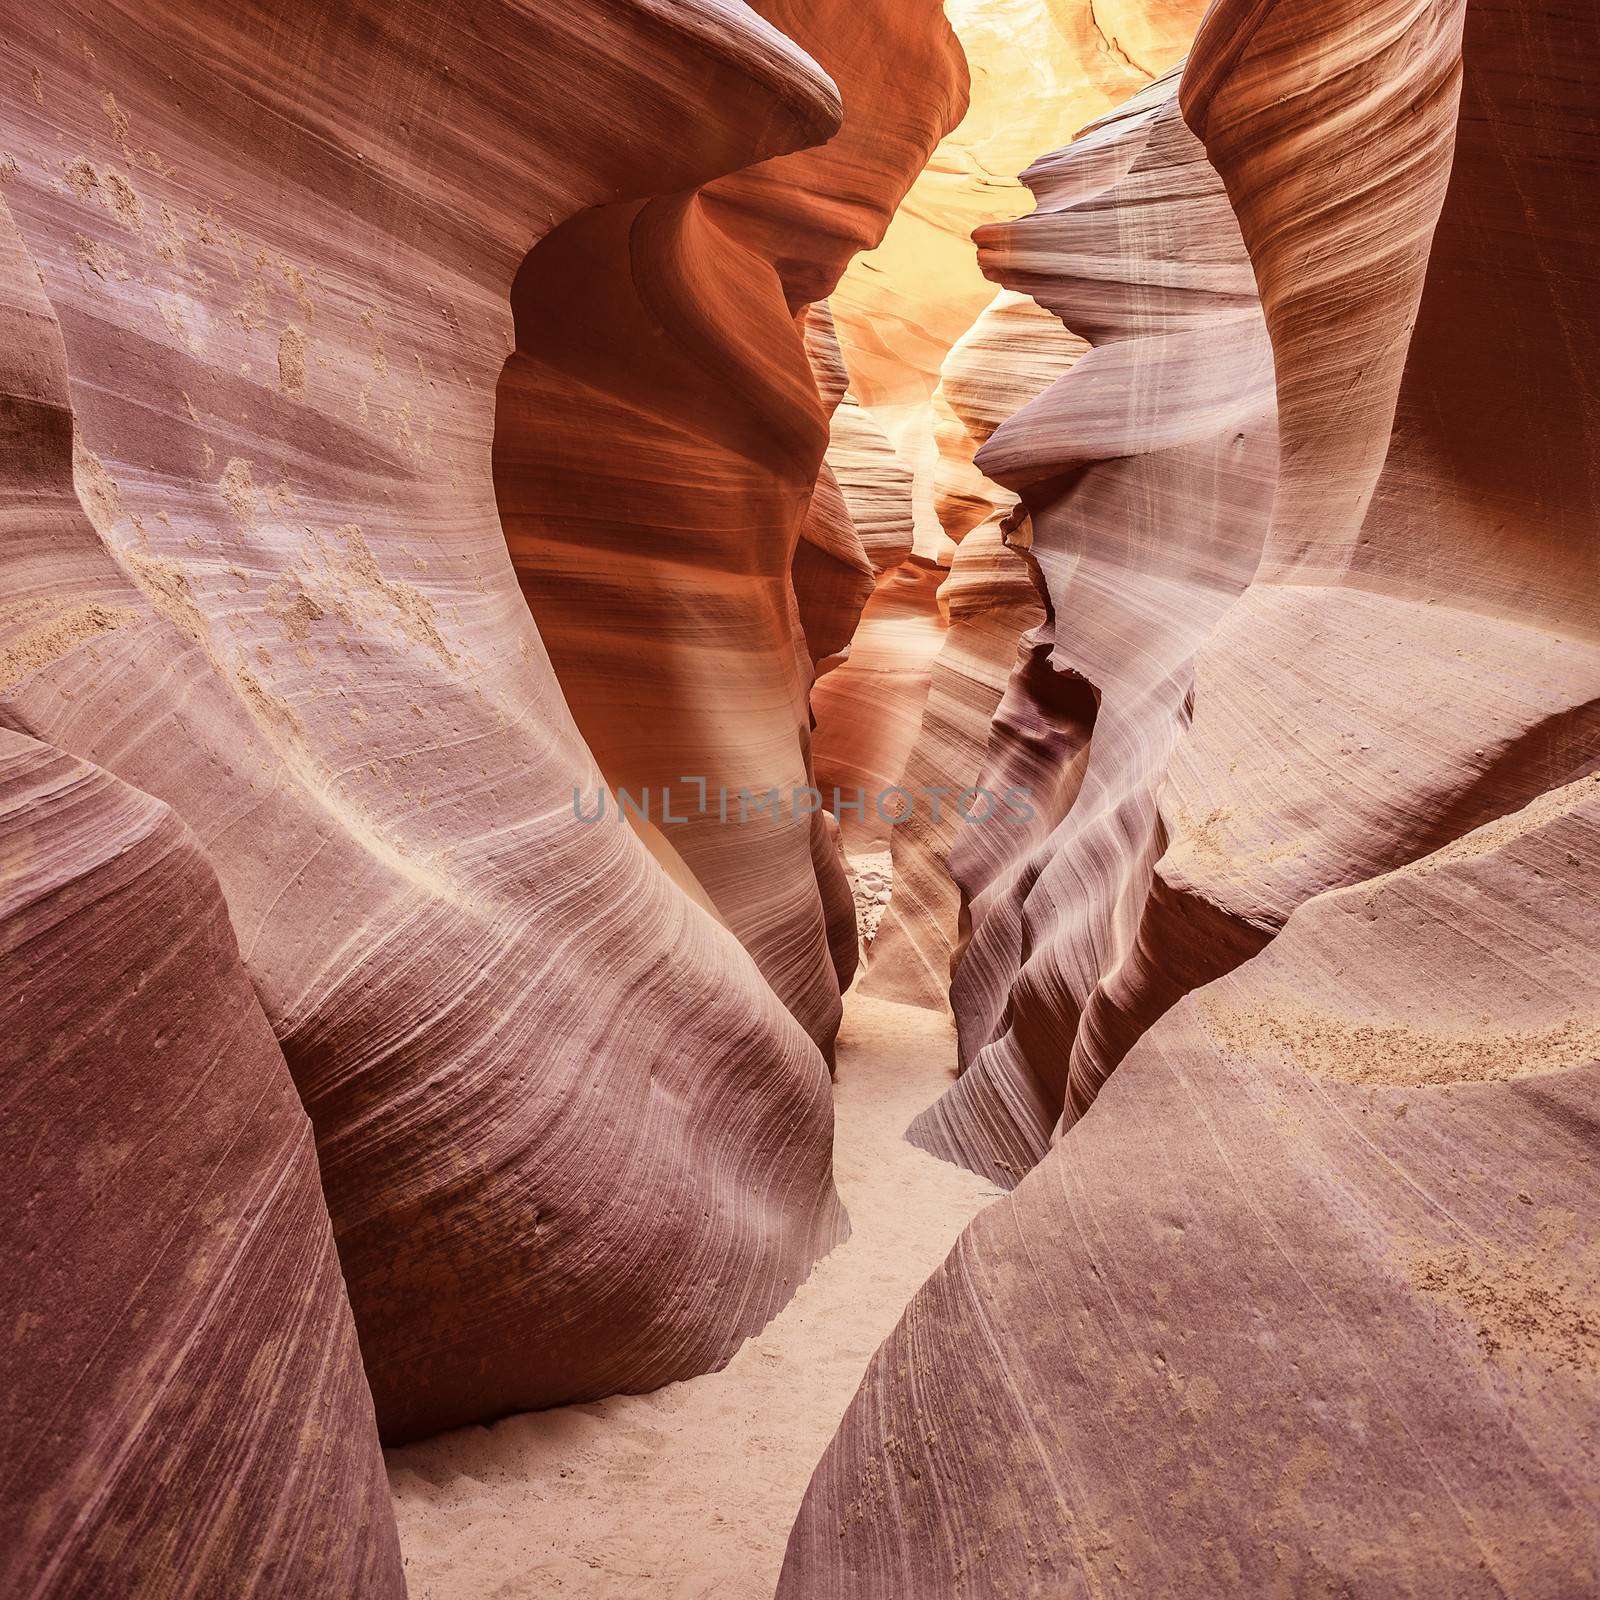 View in the famous Antelope Canyon, USA